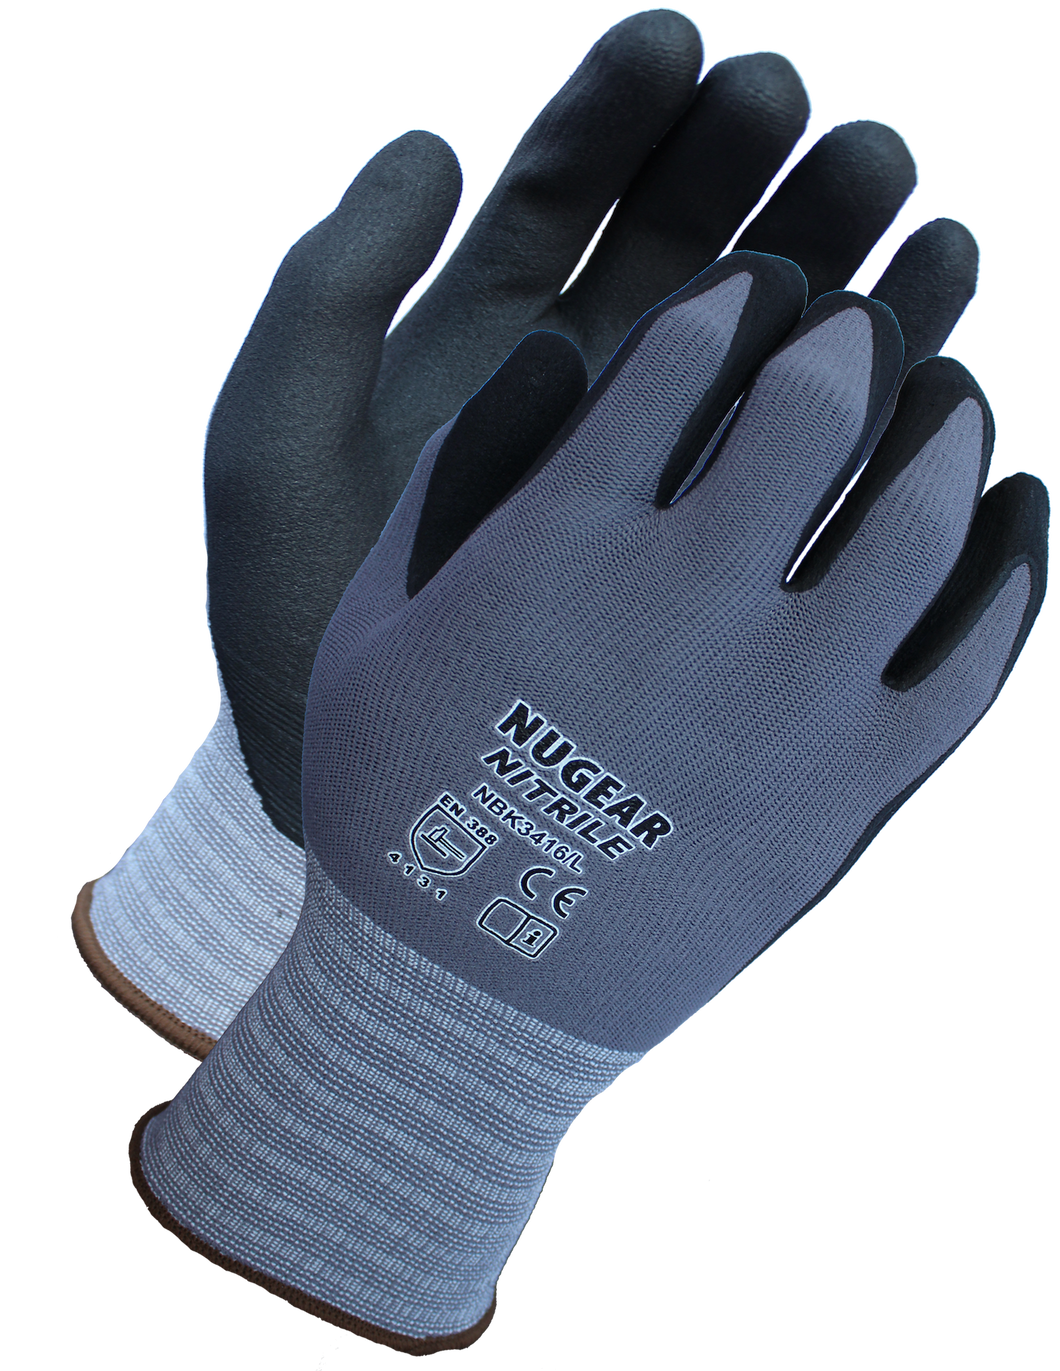 NuGear Nitrile Micro-Foam Coated Gloves with Nylon/Spandex Shell